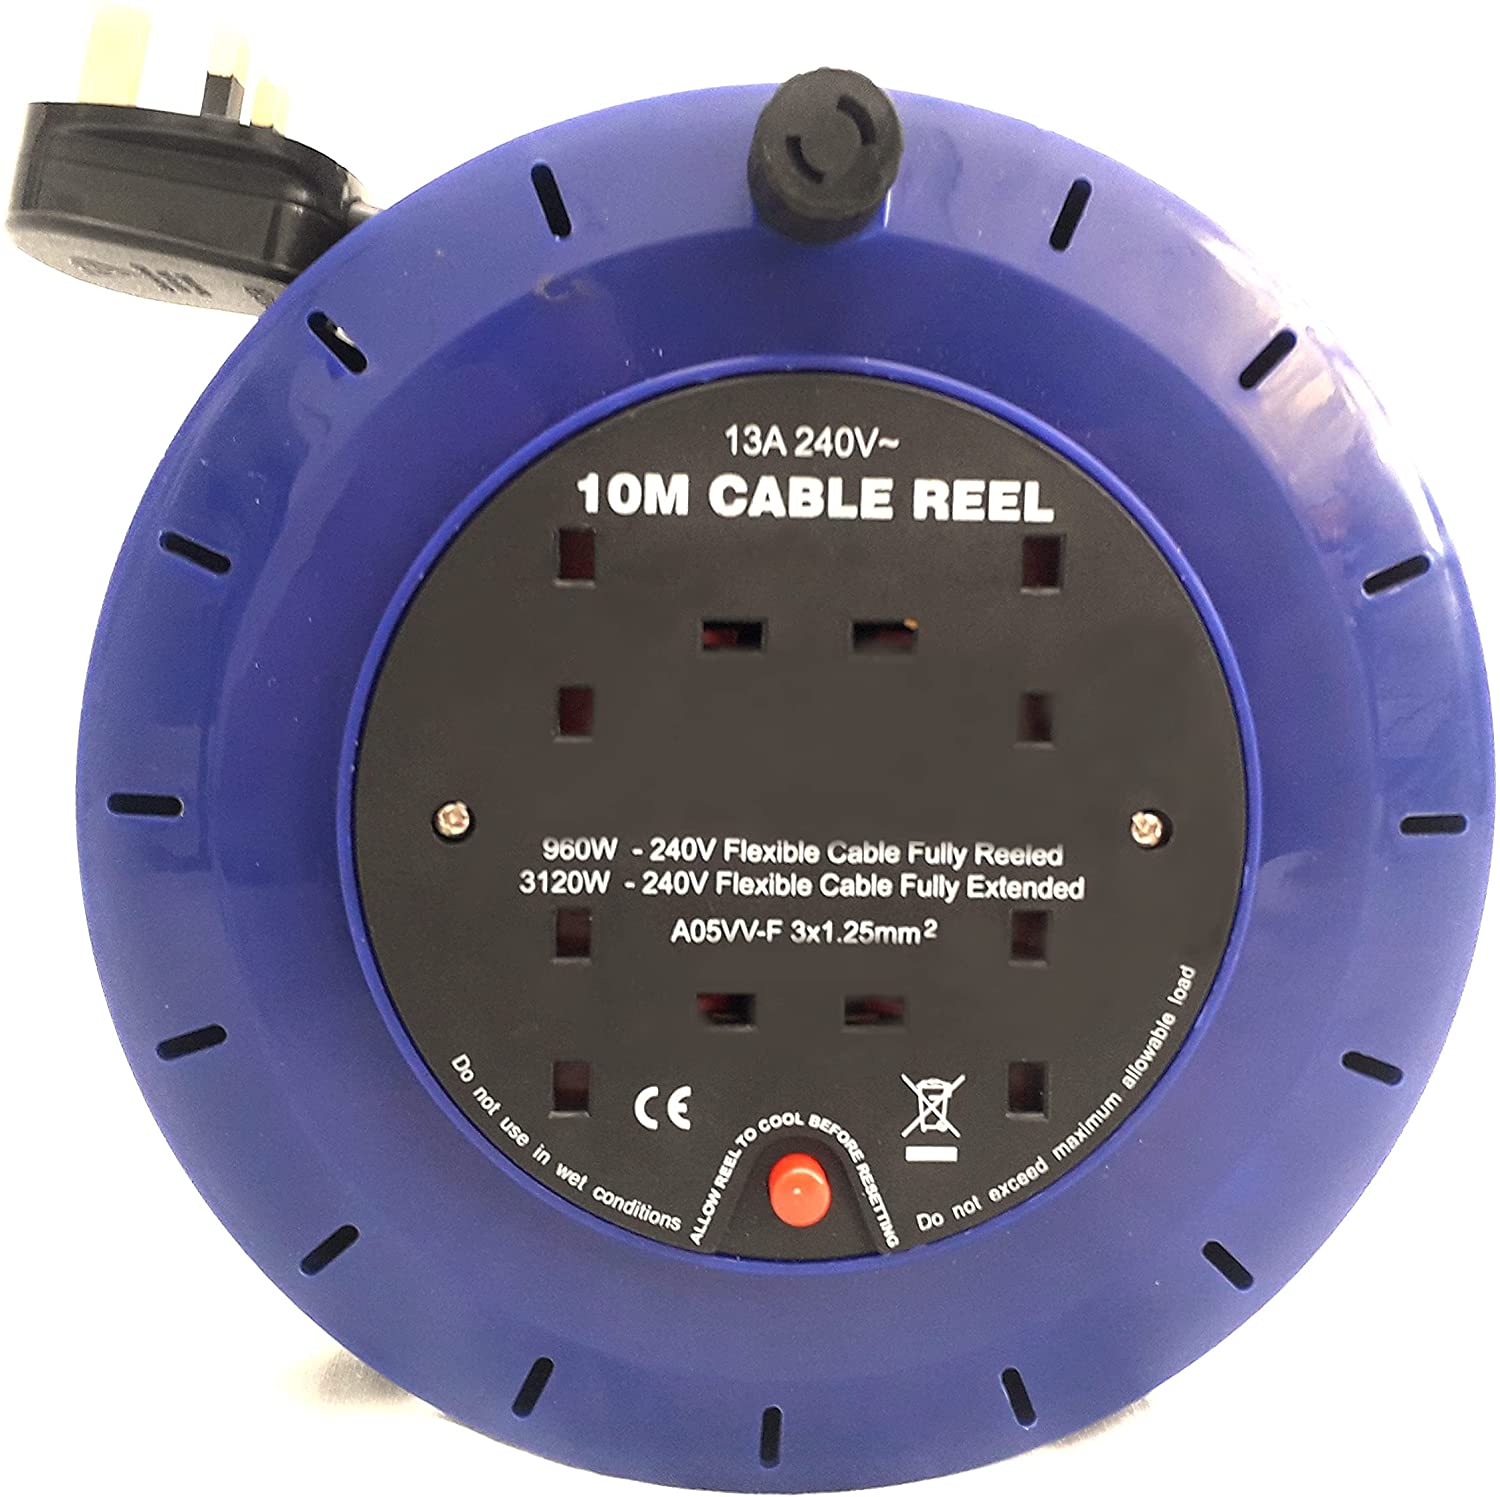 General Hardware | Cable Reel - 10m by Weirs of Baggot St